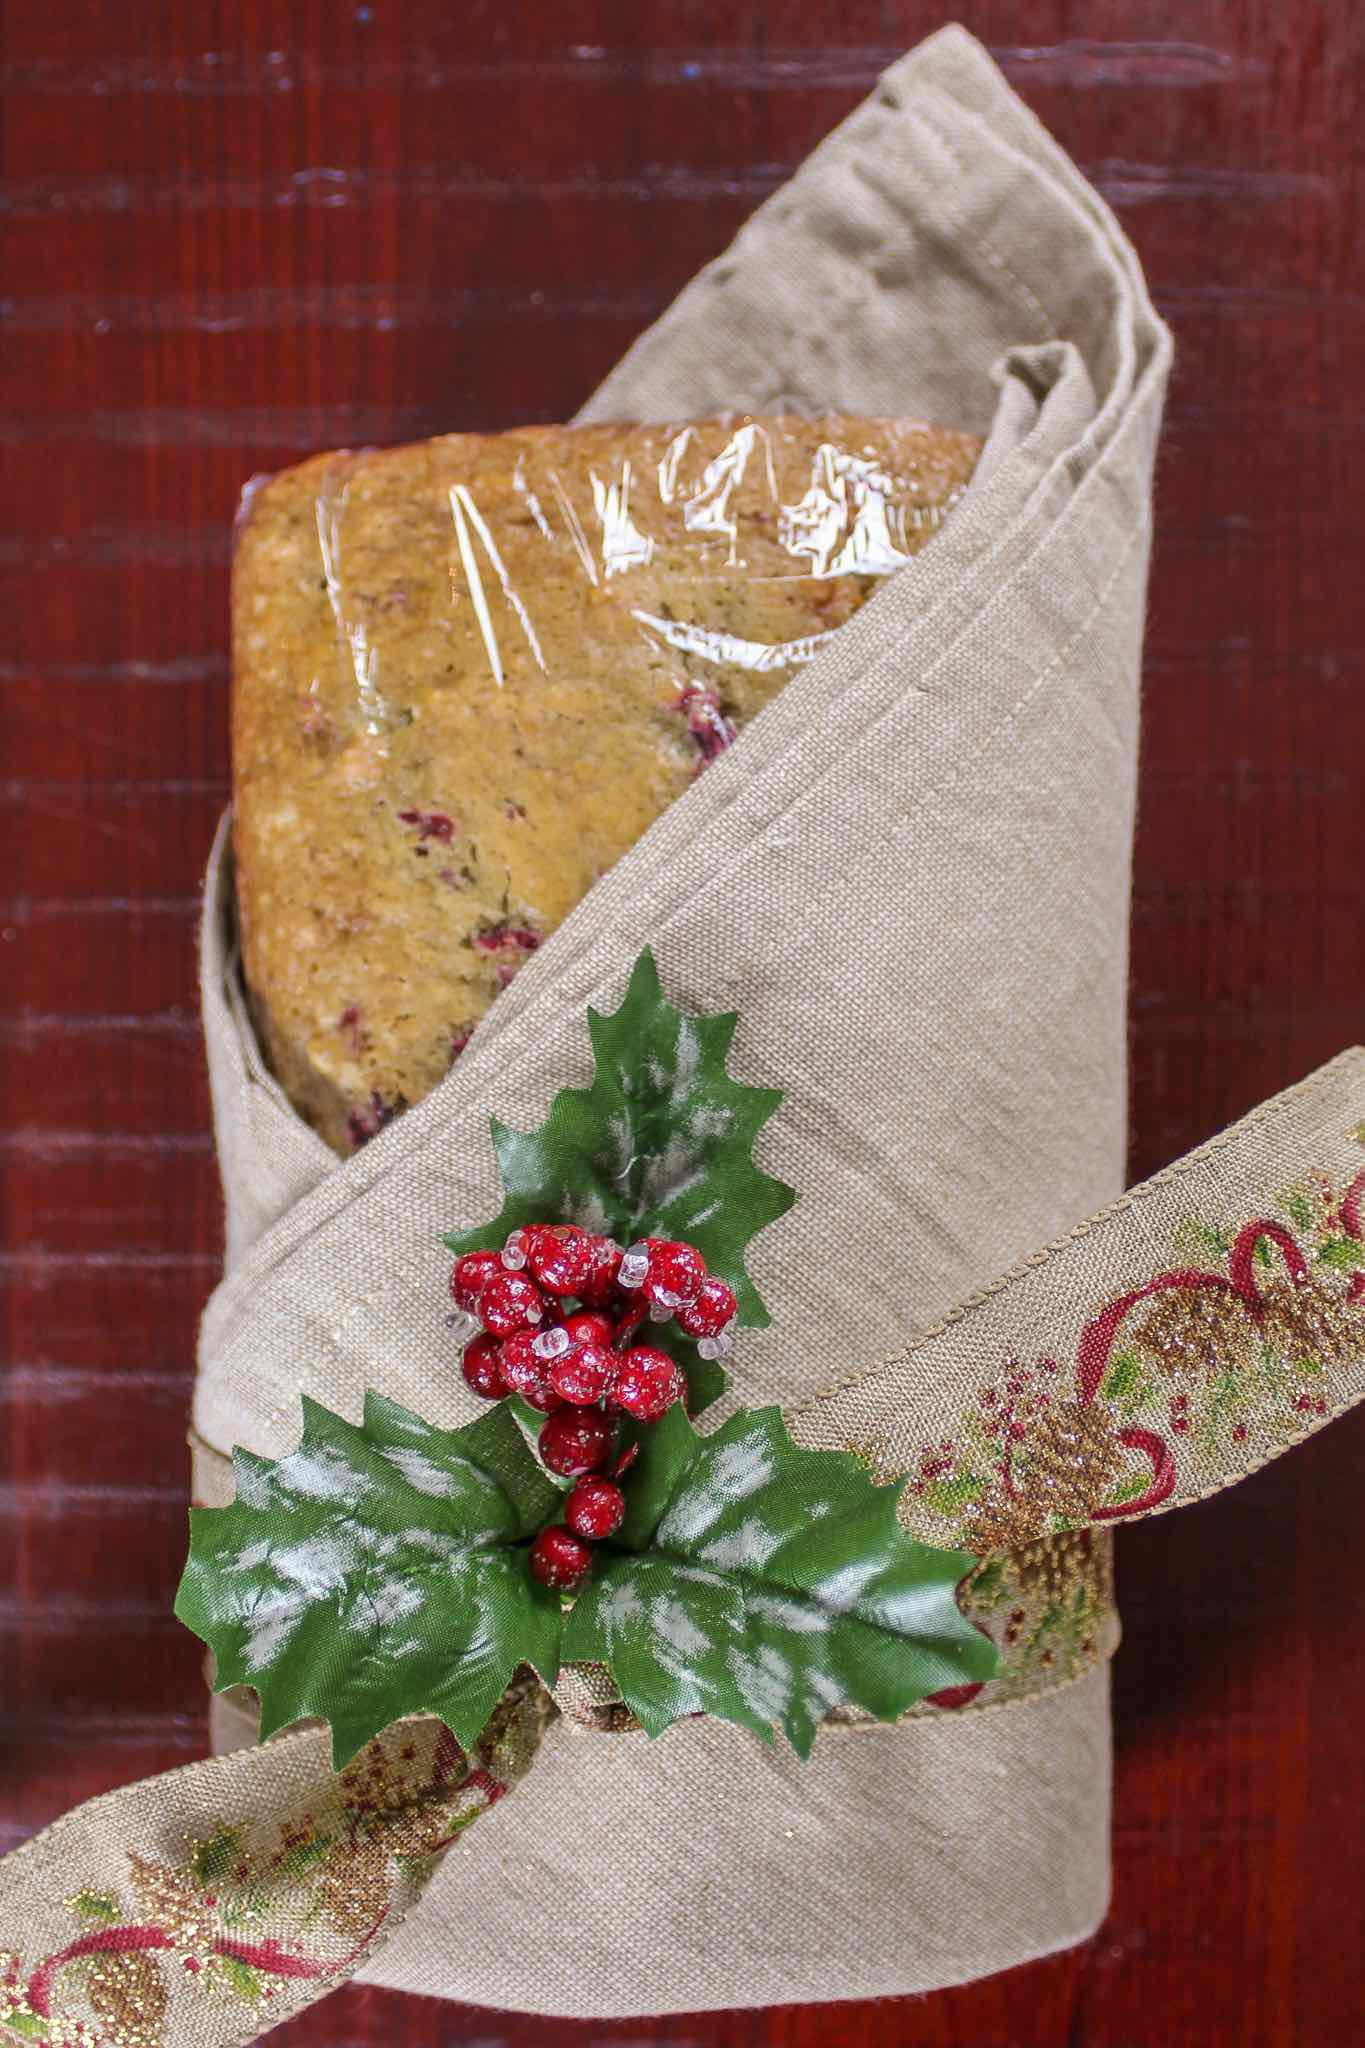 cranberry nut bread wrapped in cloth and tied with a ribbon